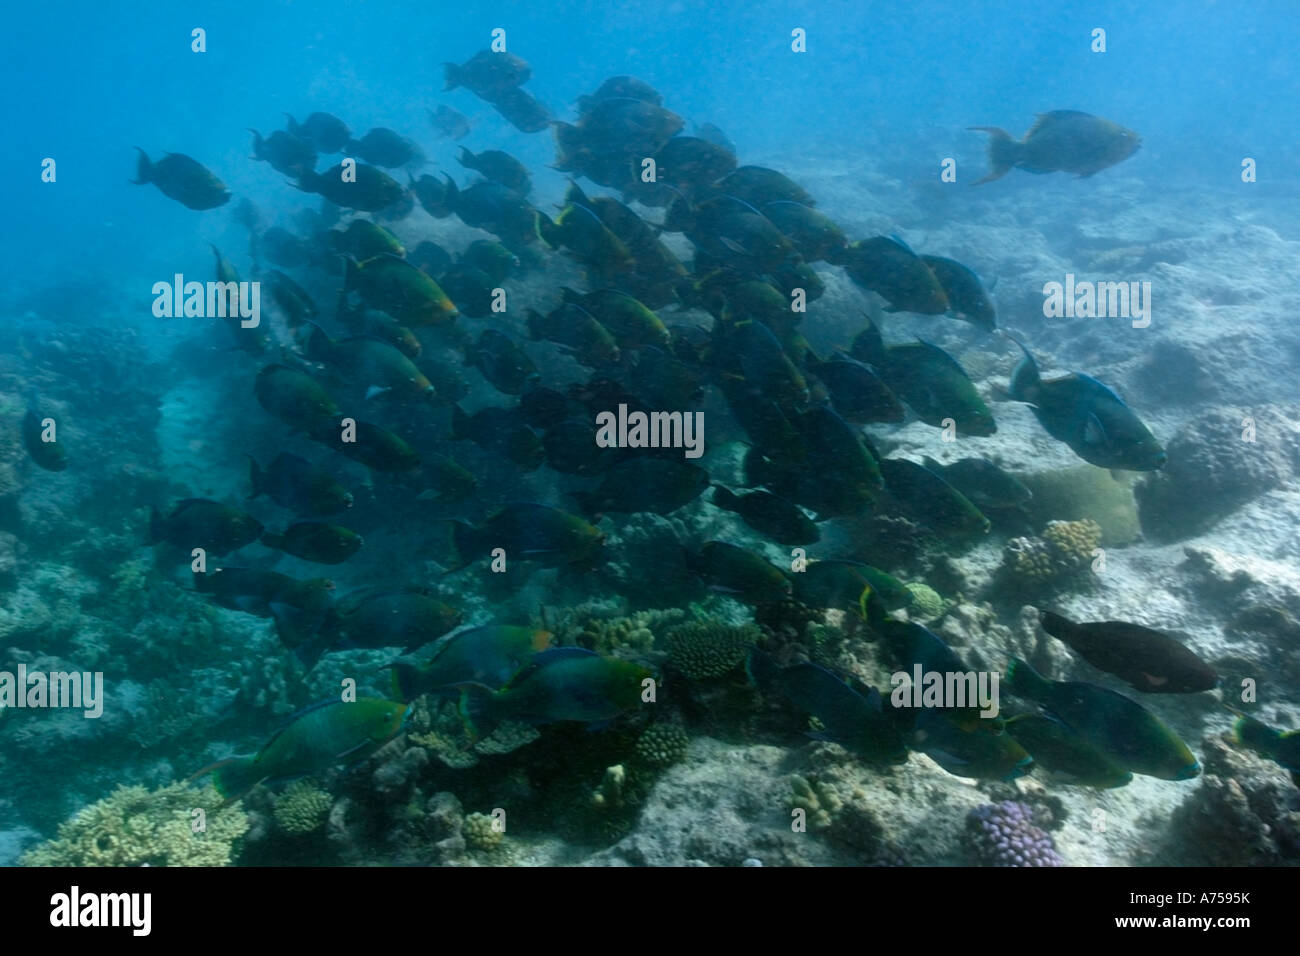 School of dozens of filament fin parrotfish Scarus altipinnis grazing on the reef Rongelap Atoll Marshall Islands Micronesia Stock Photo